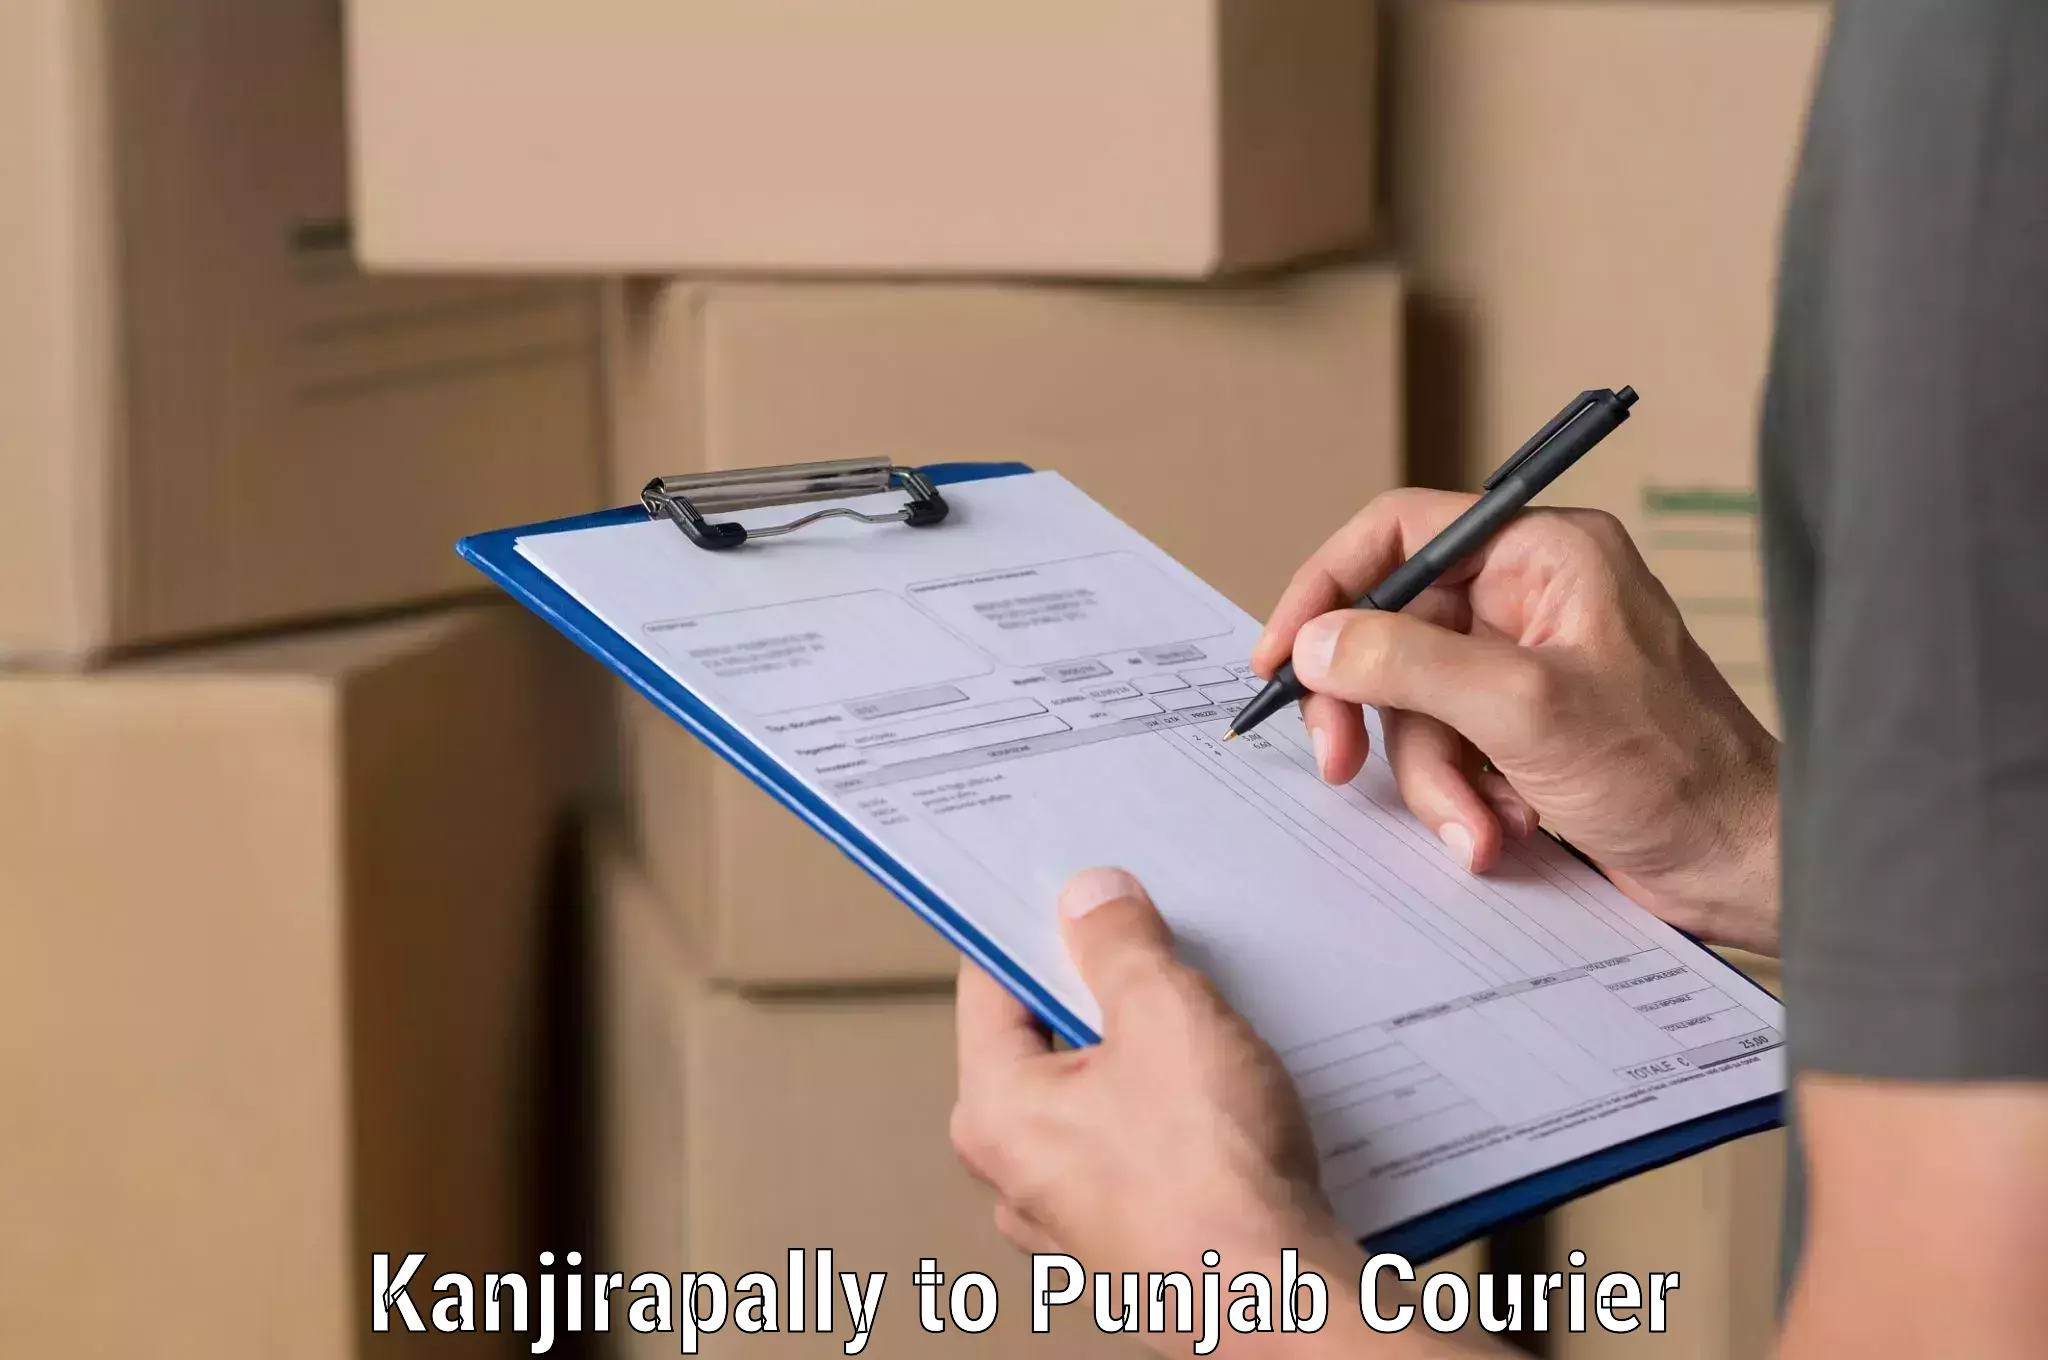 Large-scale shipping solutions Kanjirapally to Talwara